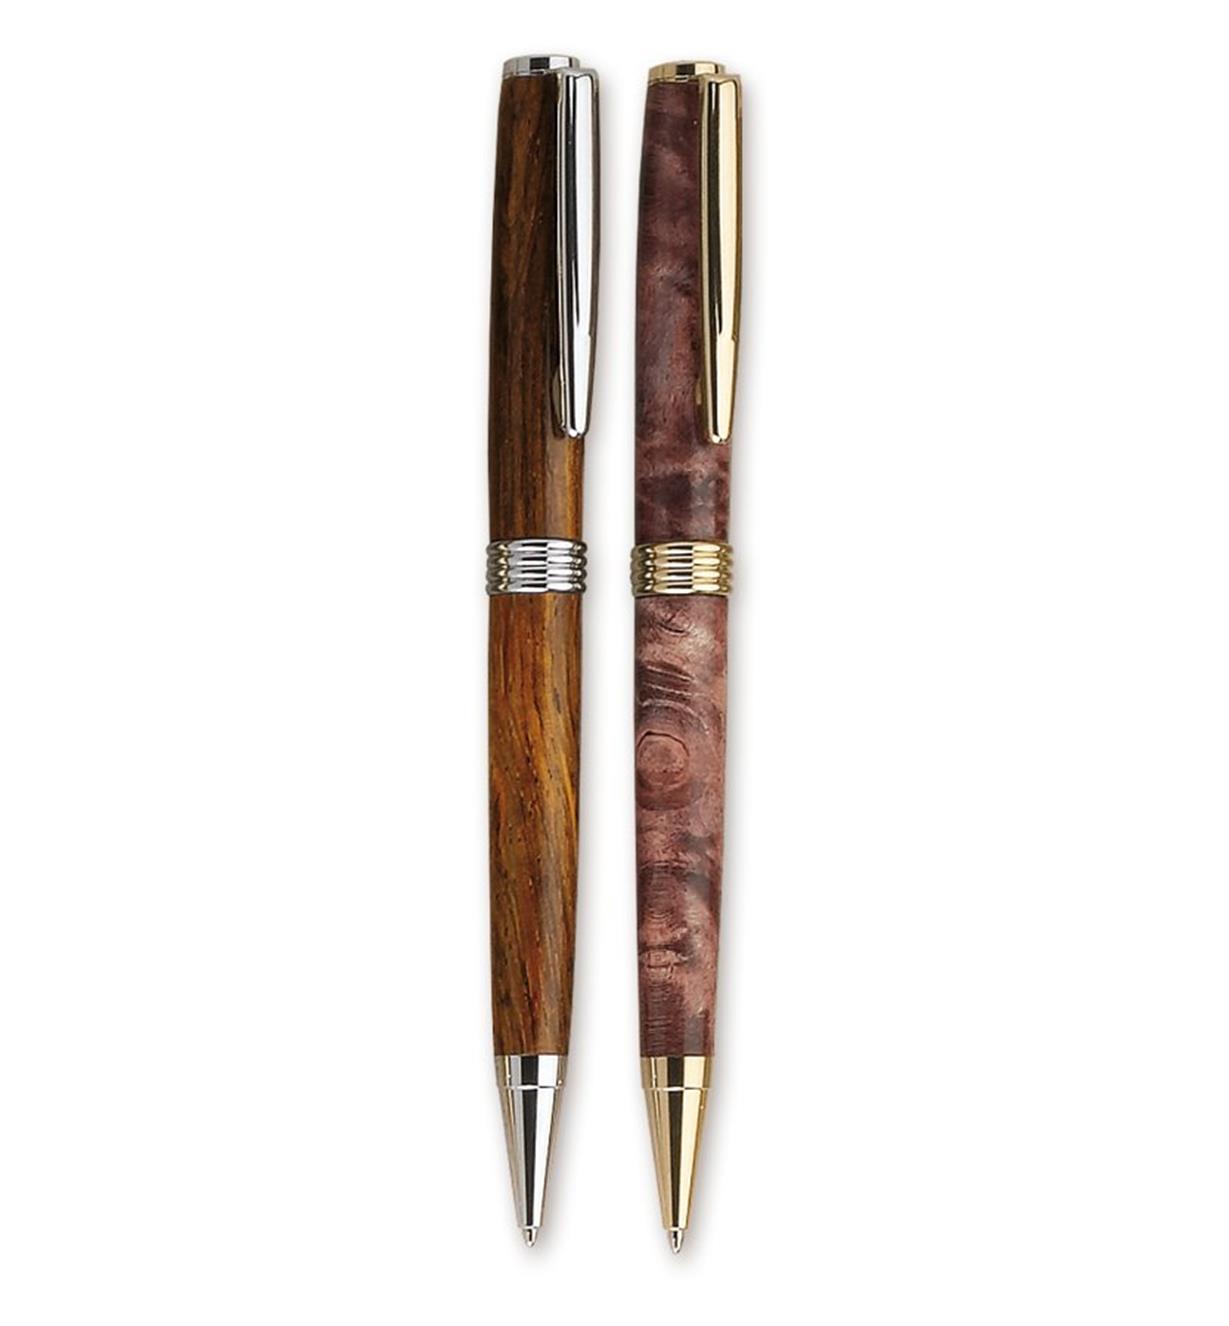 Two examples of completed Streamline Flat-Top pens